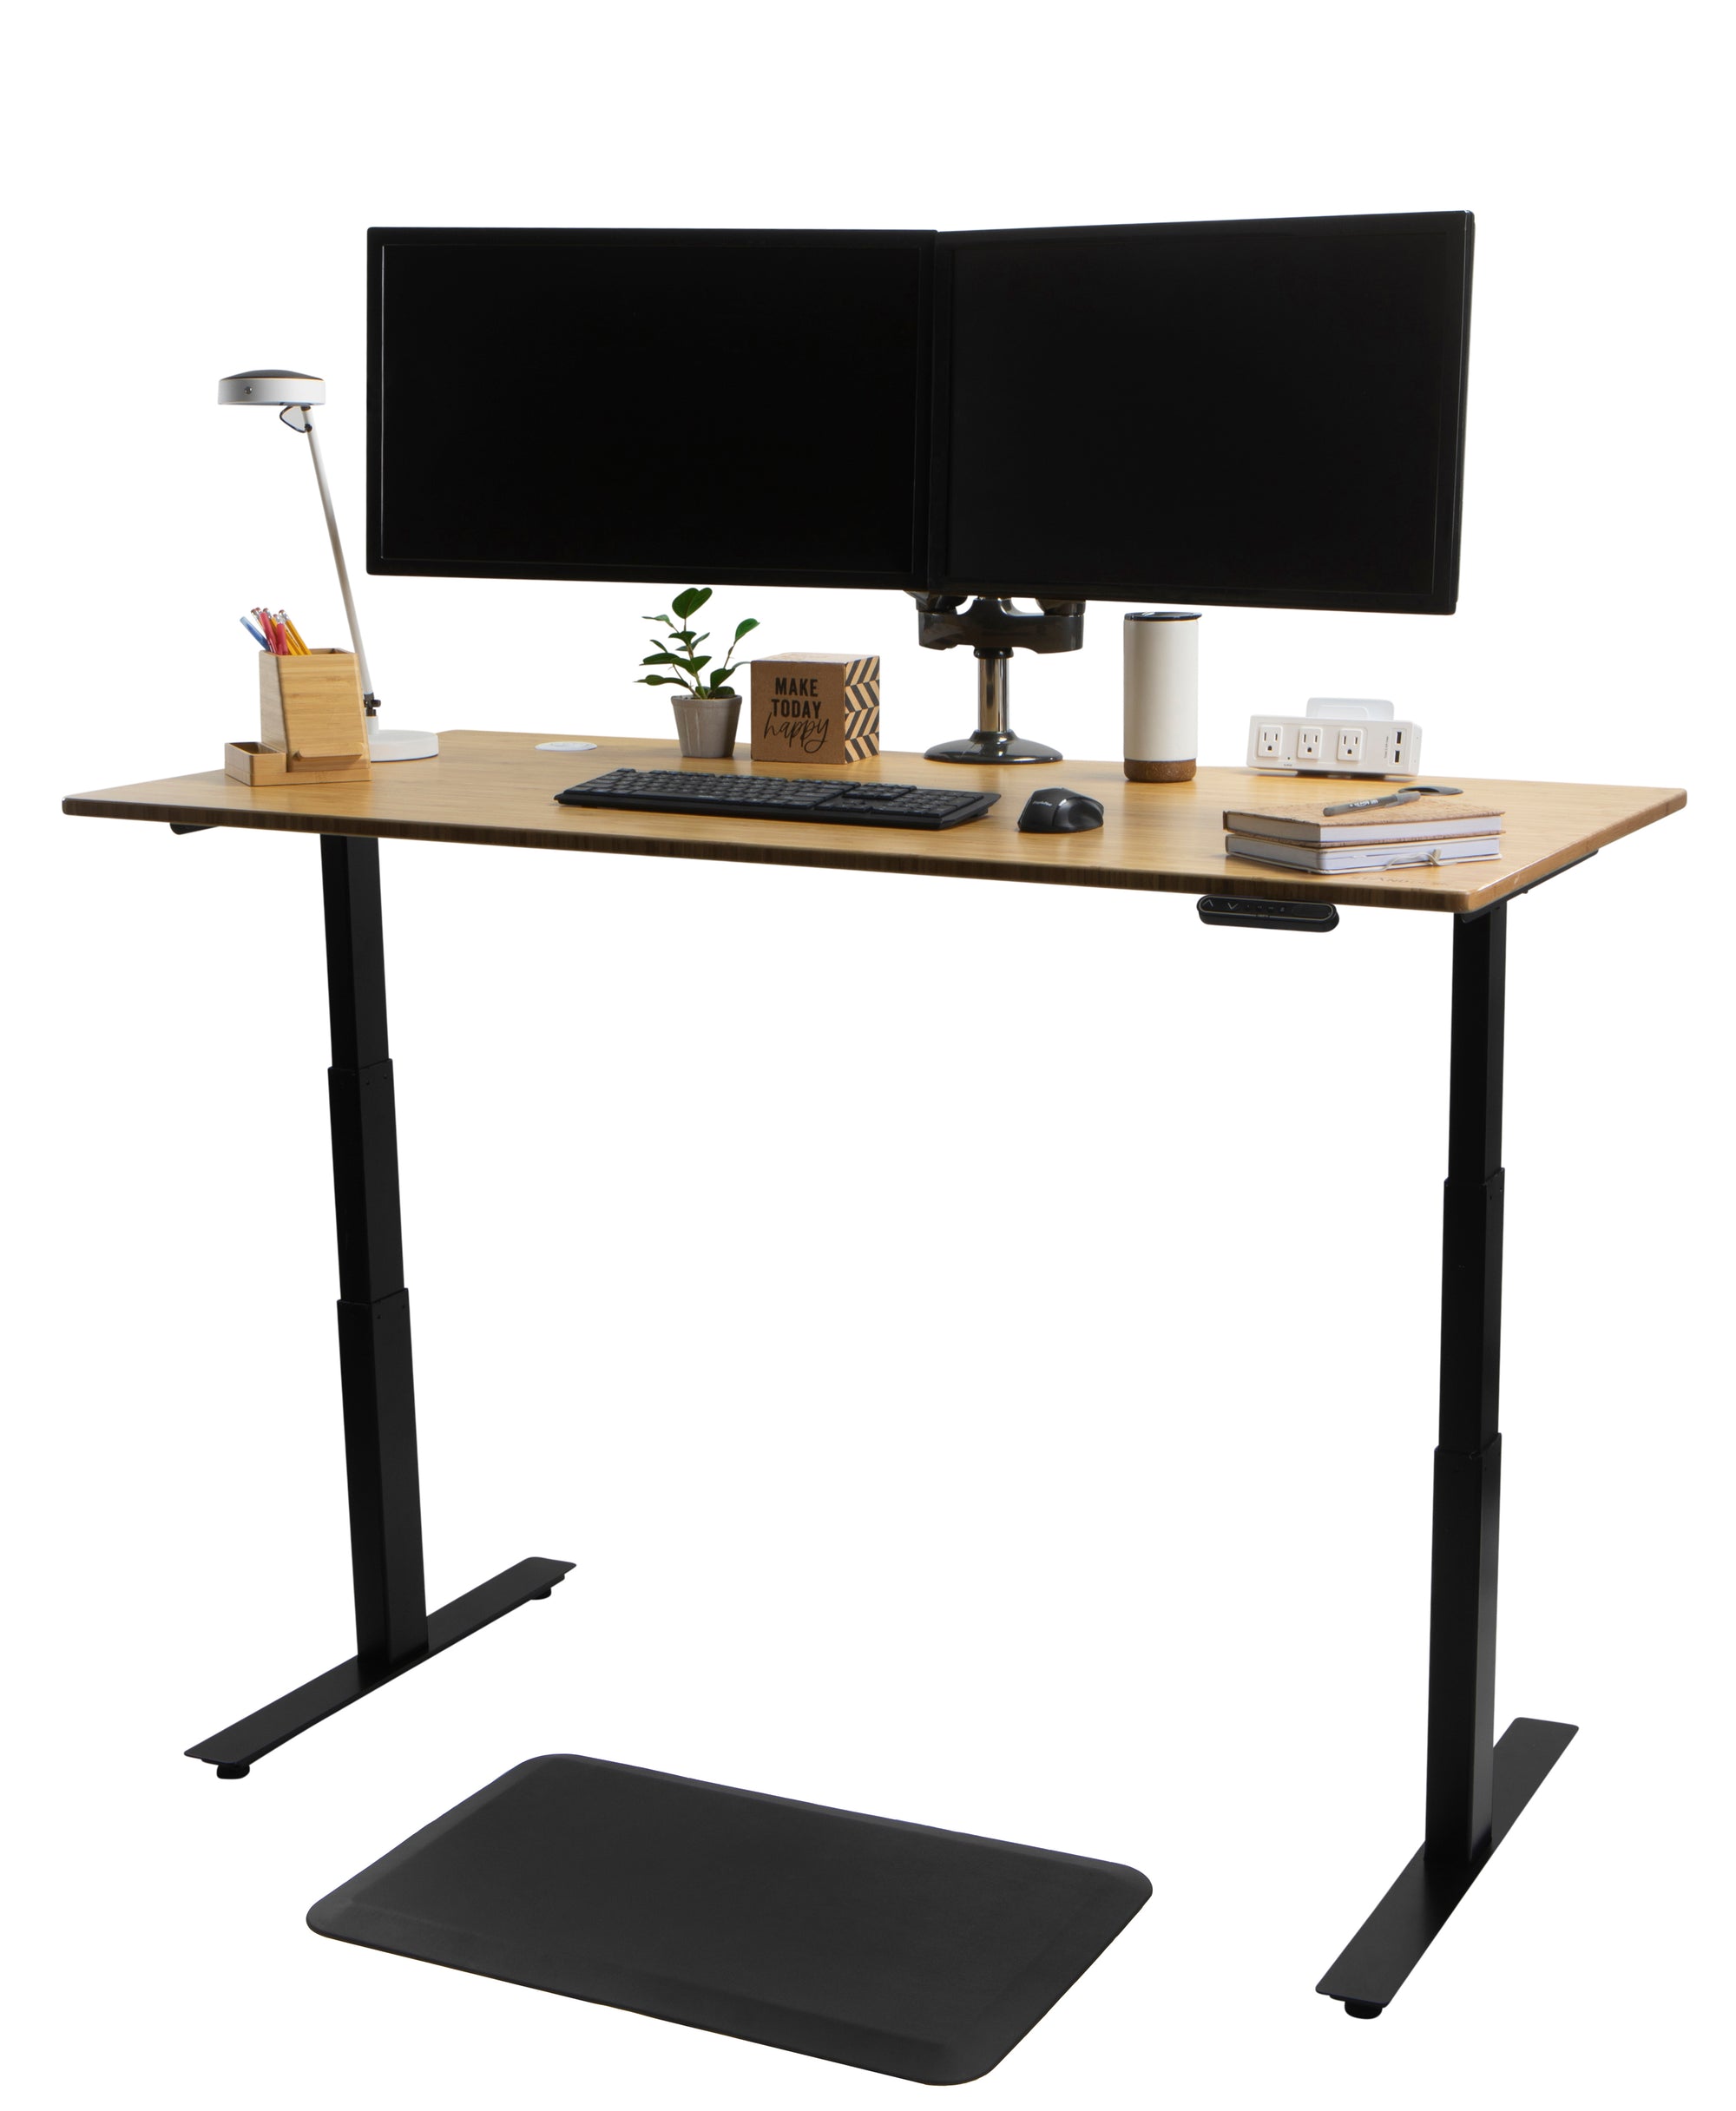 5 Best Ways to Situate Your Standing Desk Monitor for Optimal Comfort